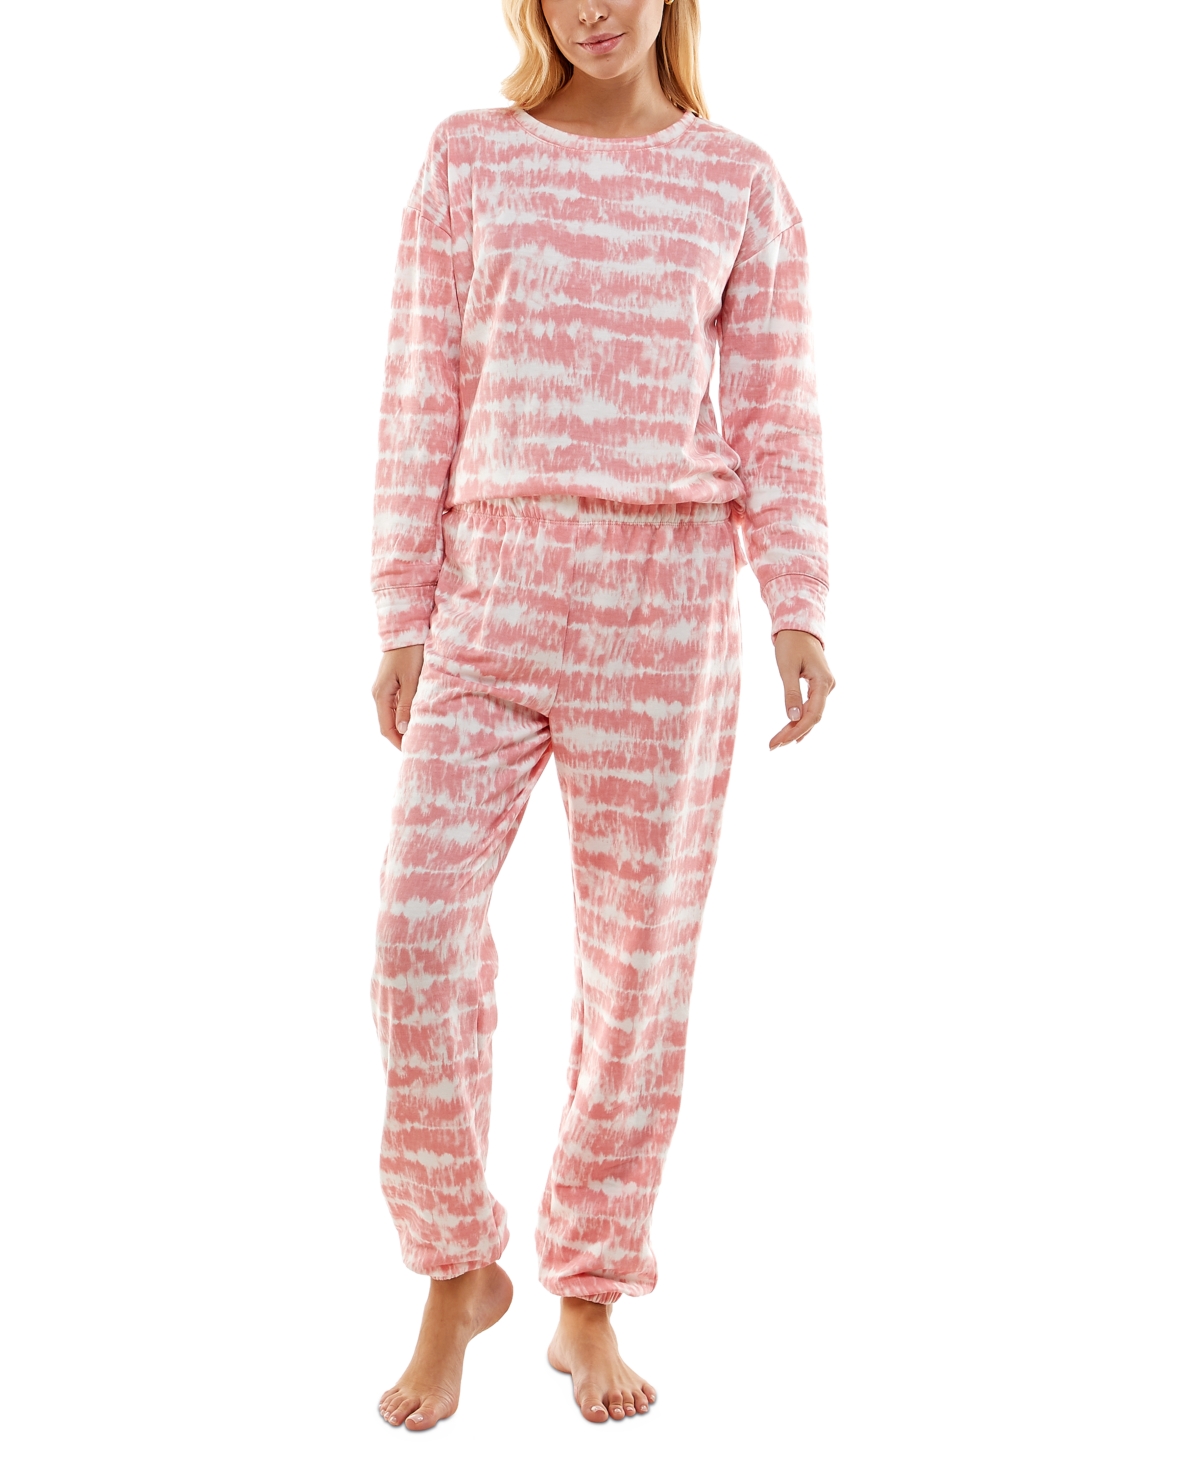 Roudelain Printed Butter-knit 2-pc. Long-sleeve Pajama Set In Washed Out Stripes Branded Apricot